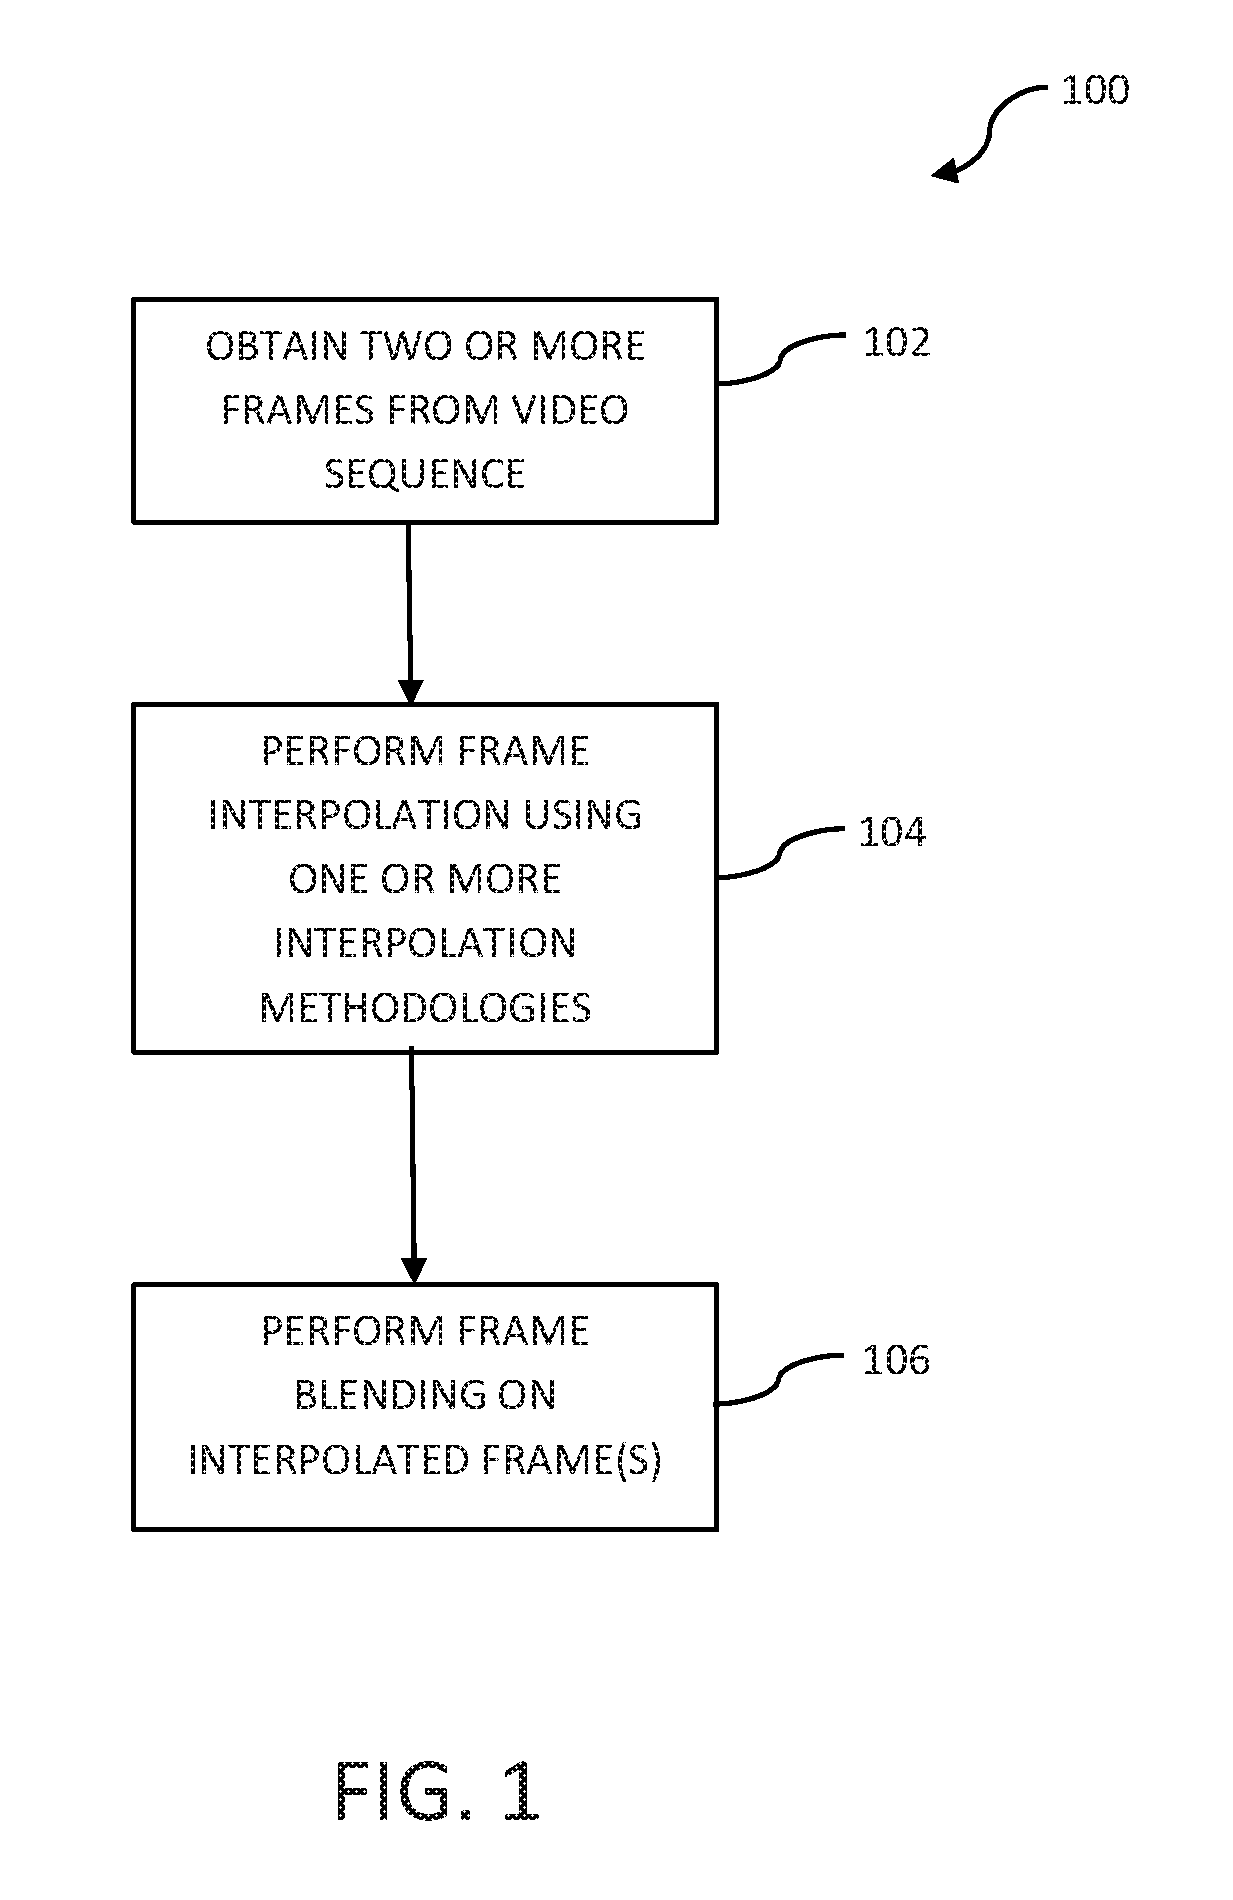 Apparatus and methods for the selection of one or more frame interpolation techniques